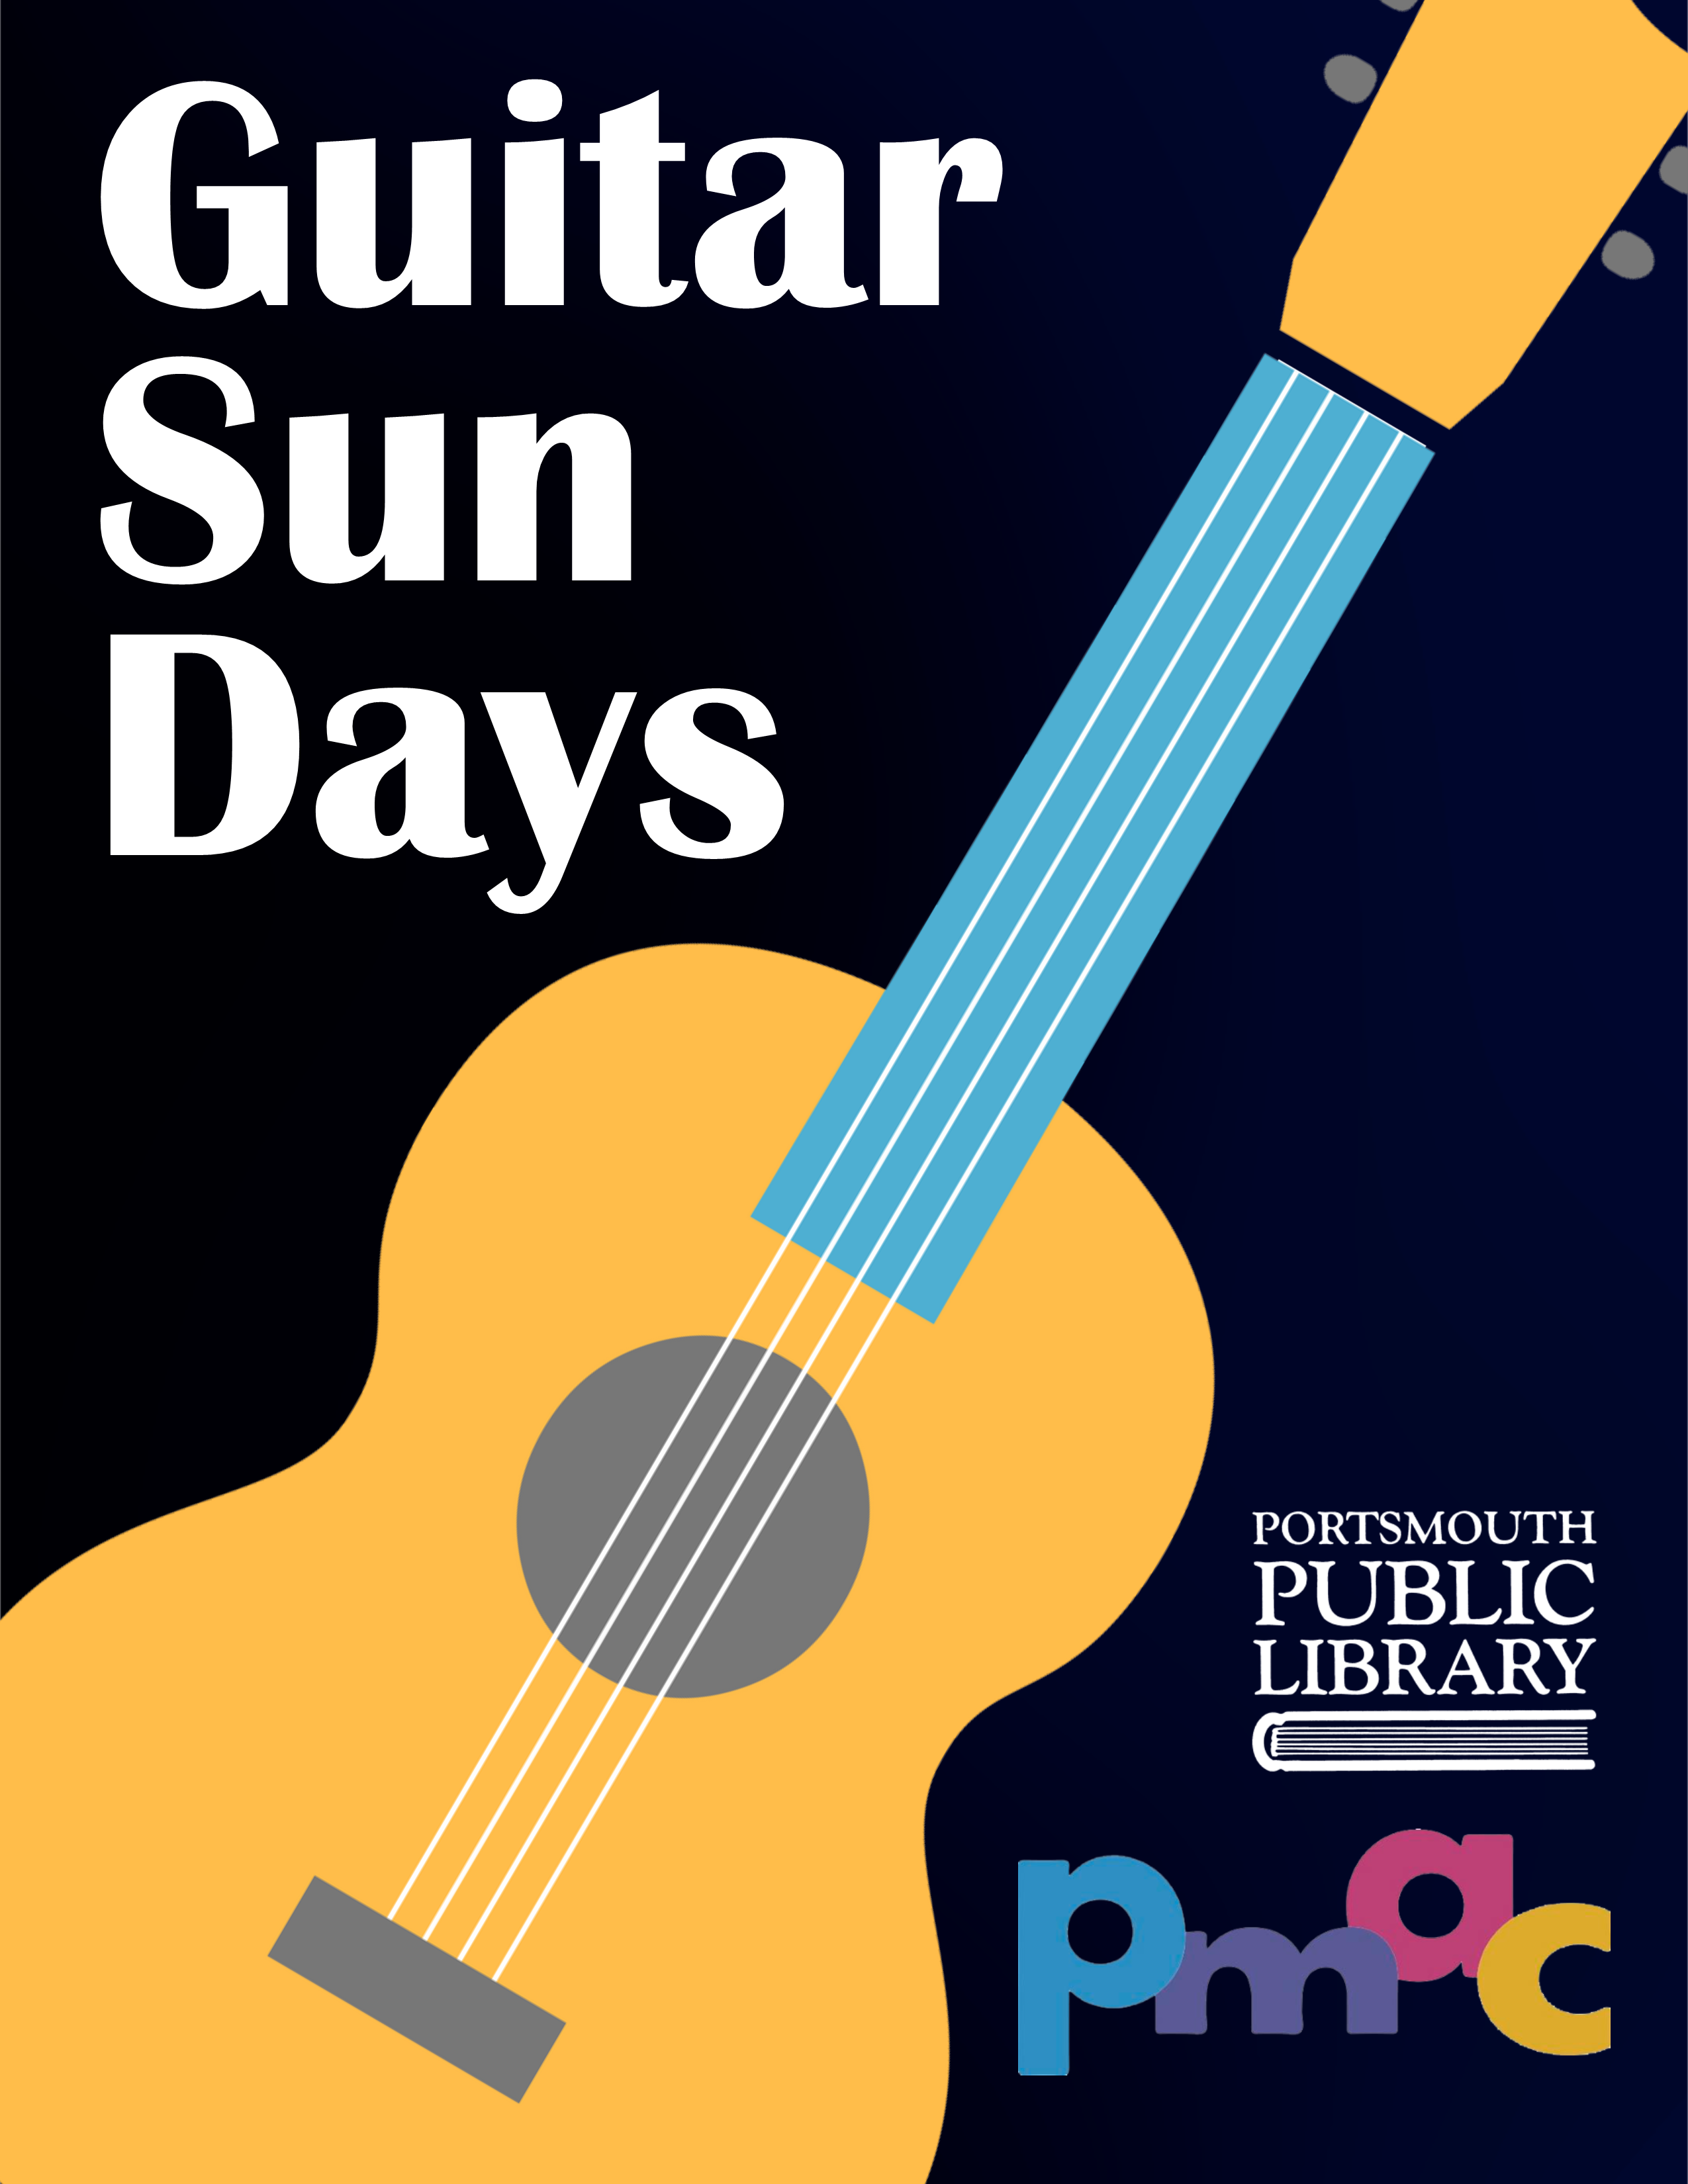 Guitar Sundays, accompanied by illustration of guitar and the PMAC and Portsmouth Public Library logos